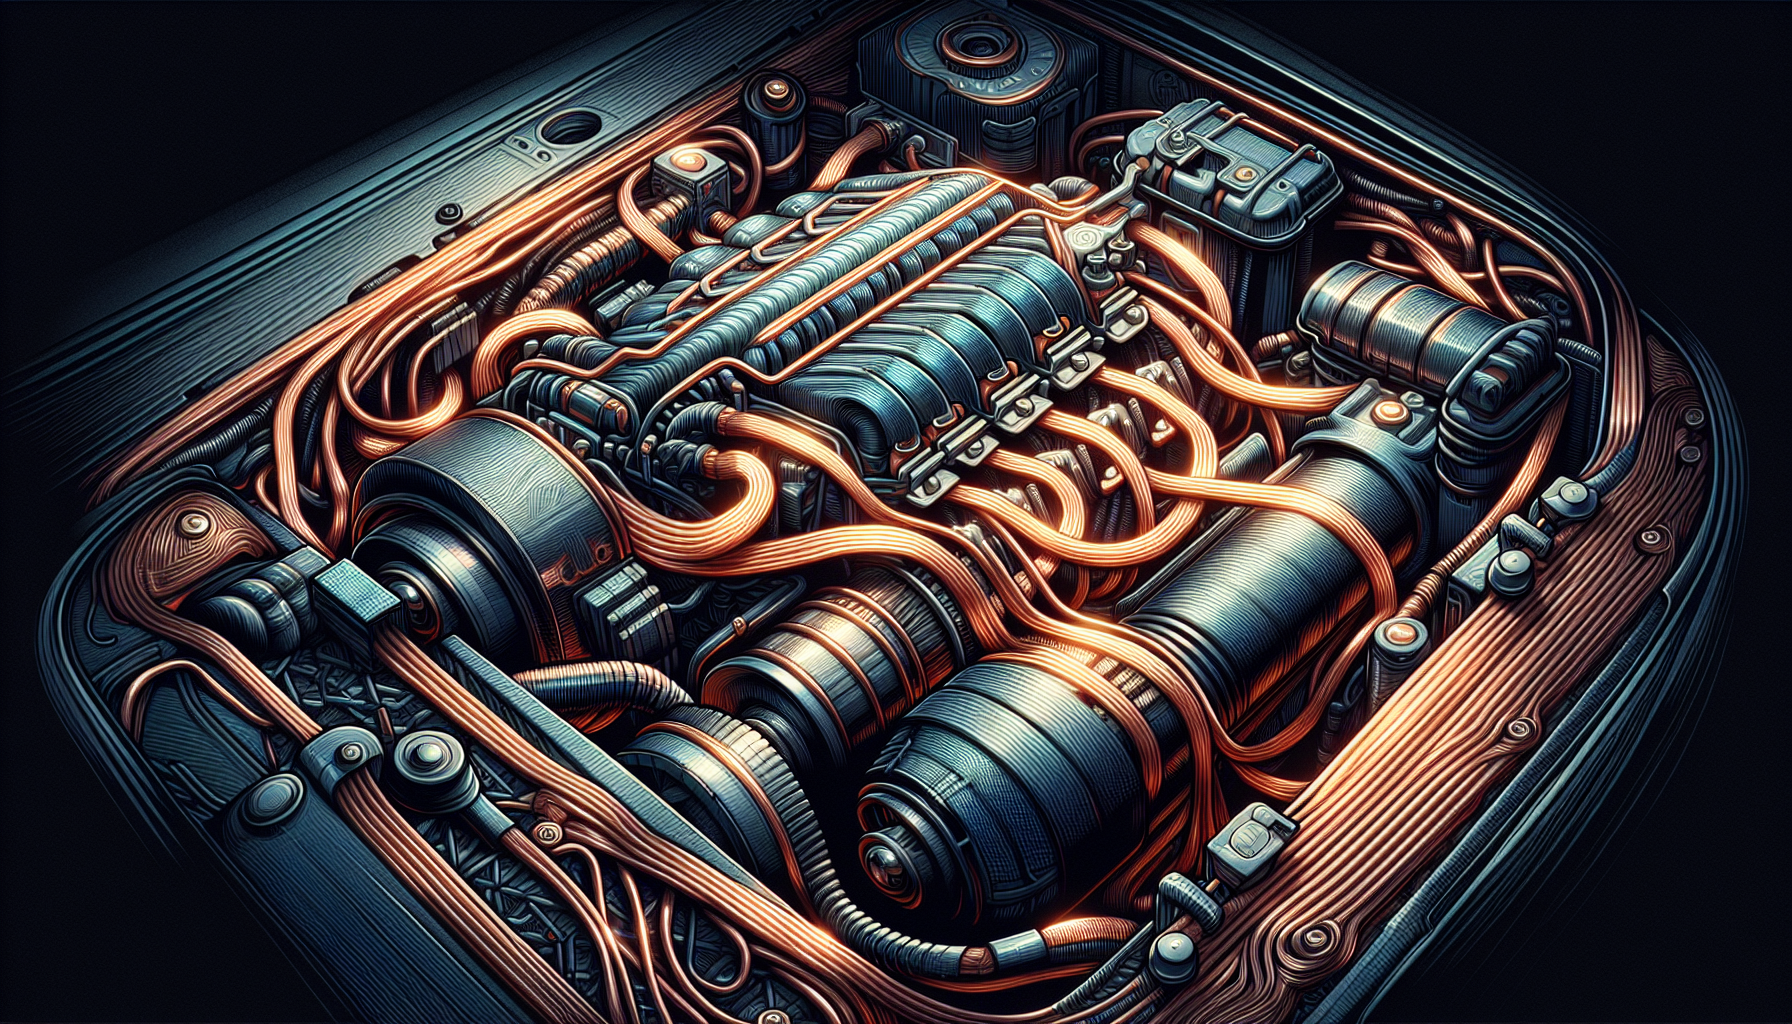 Illustration of essential car components with copper wiring and cooling systems